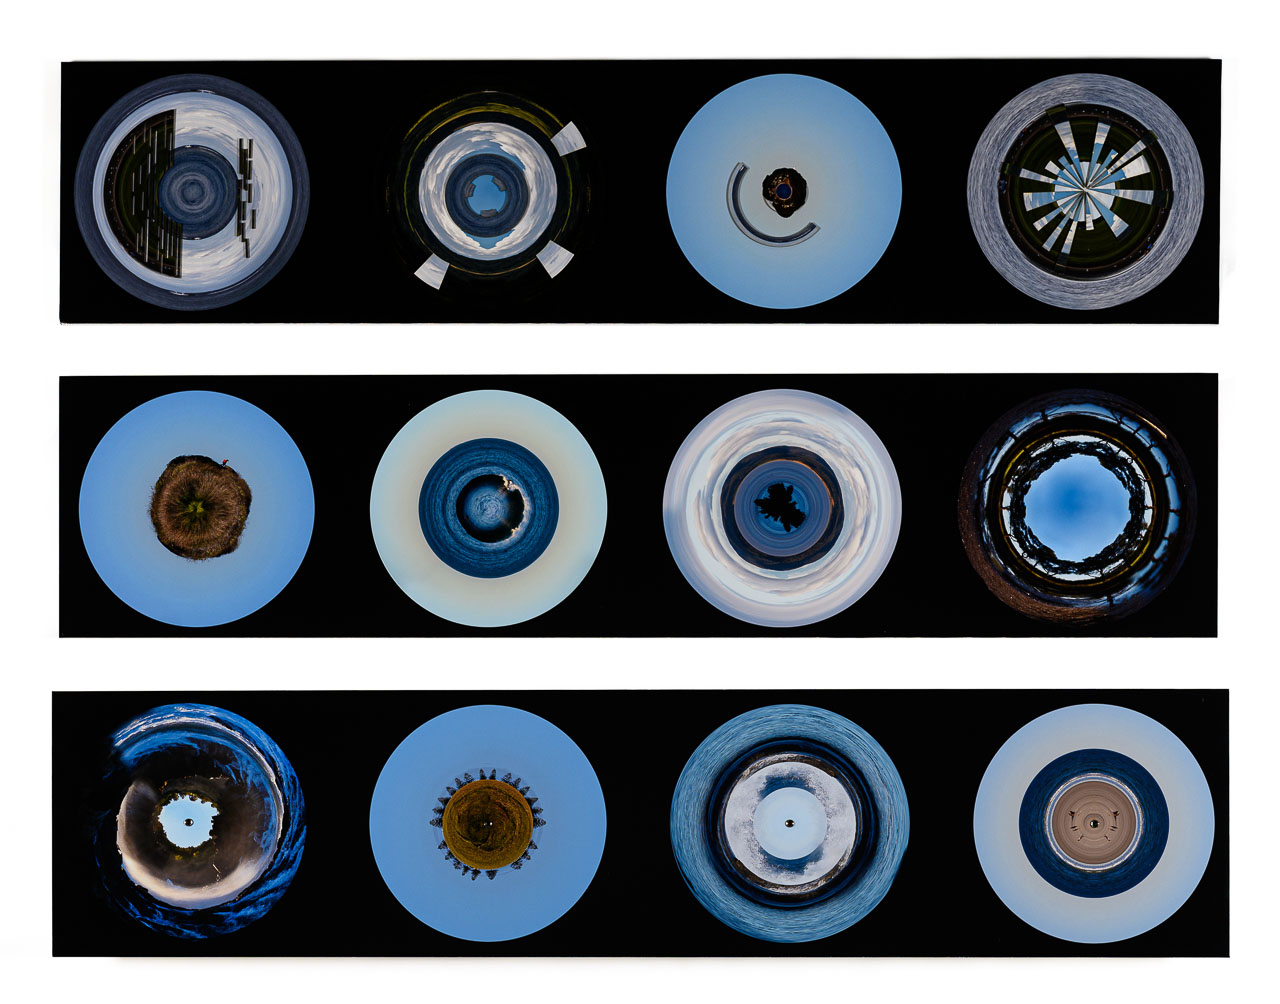 Three long black panels featuring blue circles, each made up of different tones and concentric shapes. The circular images are stills taken from the work which was expereineced through a VR headset.